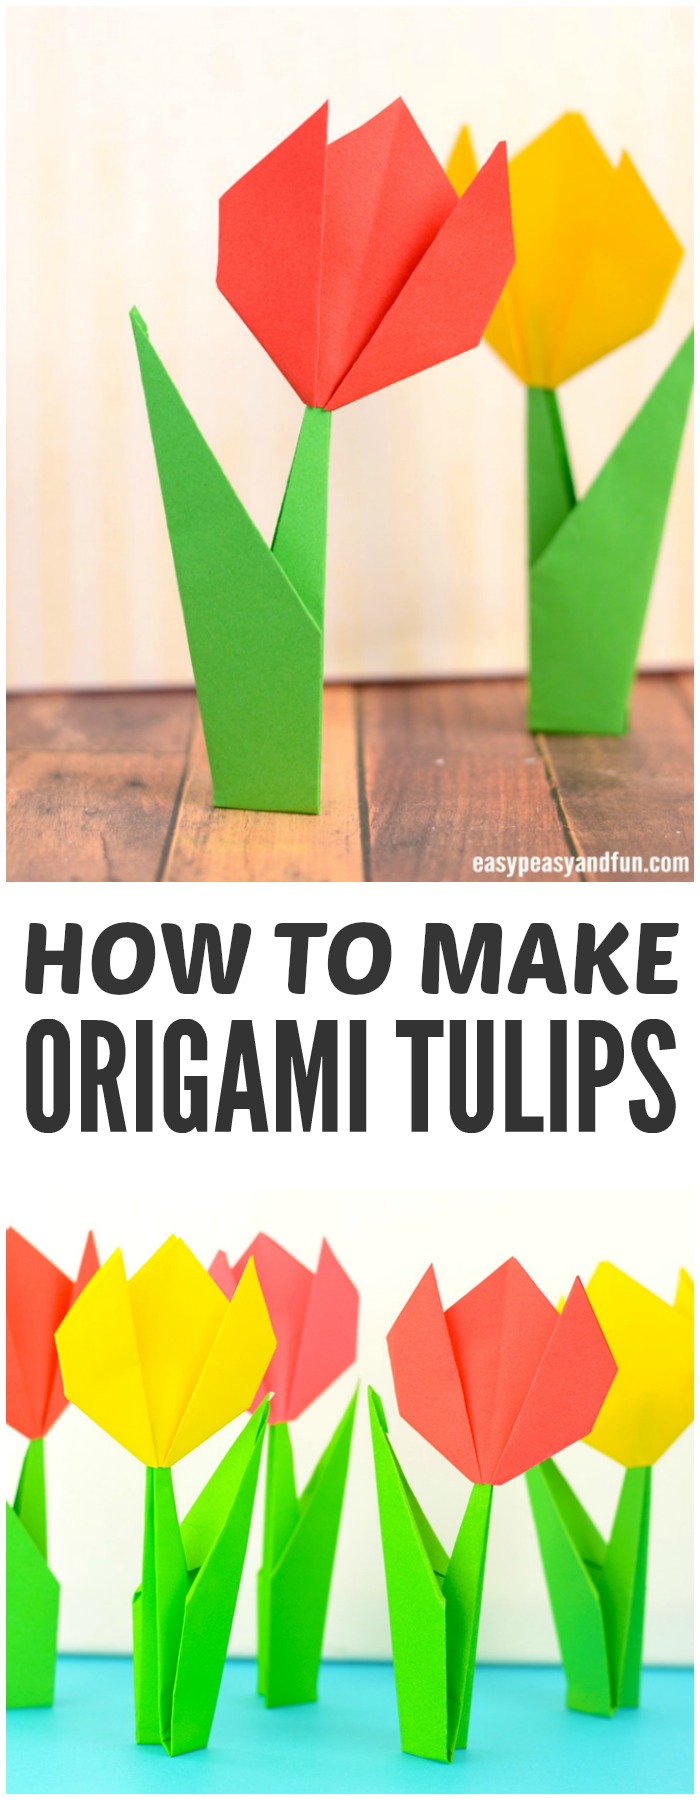 How to make origami flowers. Step by step origami tulips tutorial.